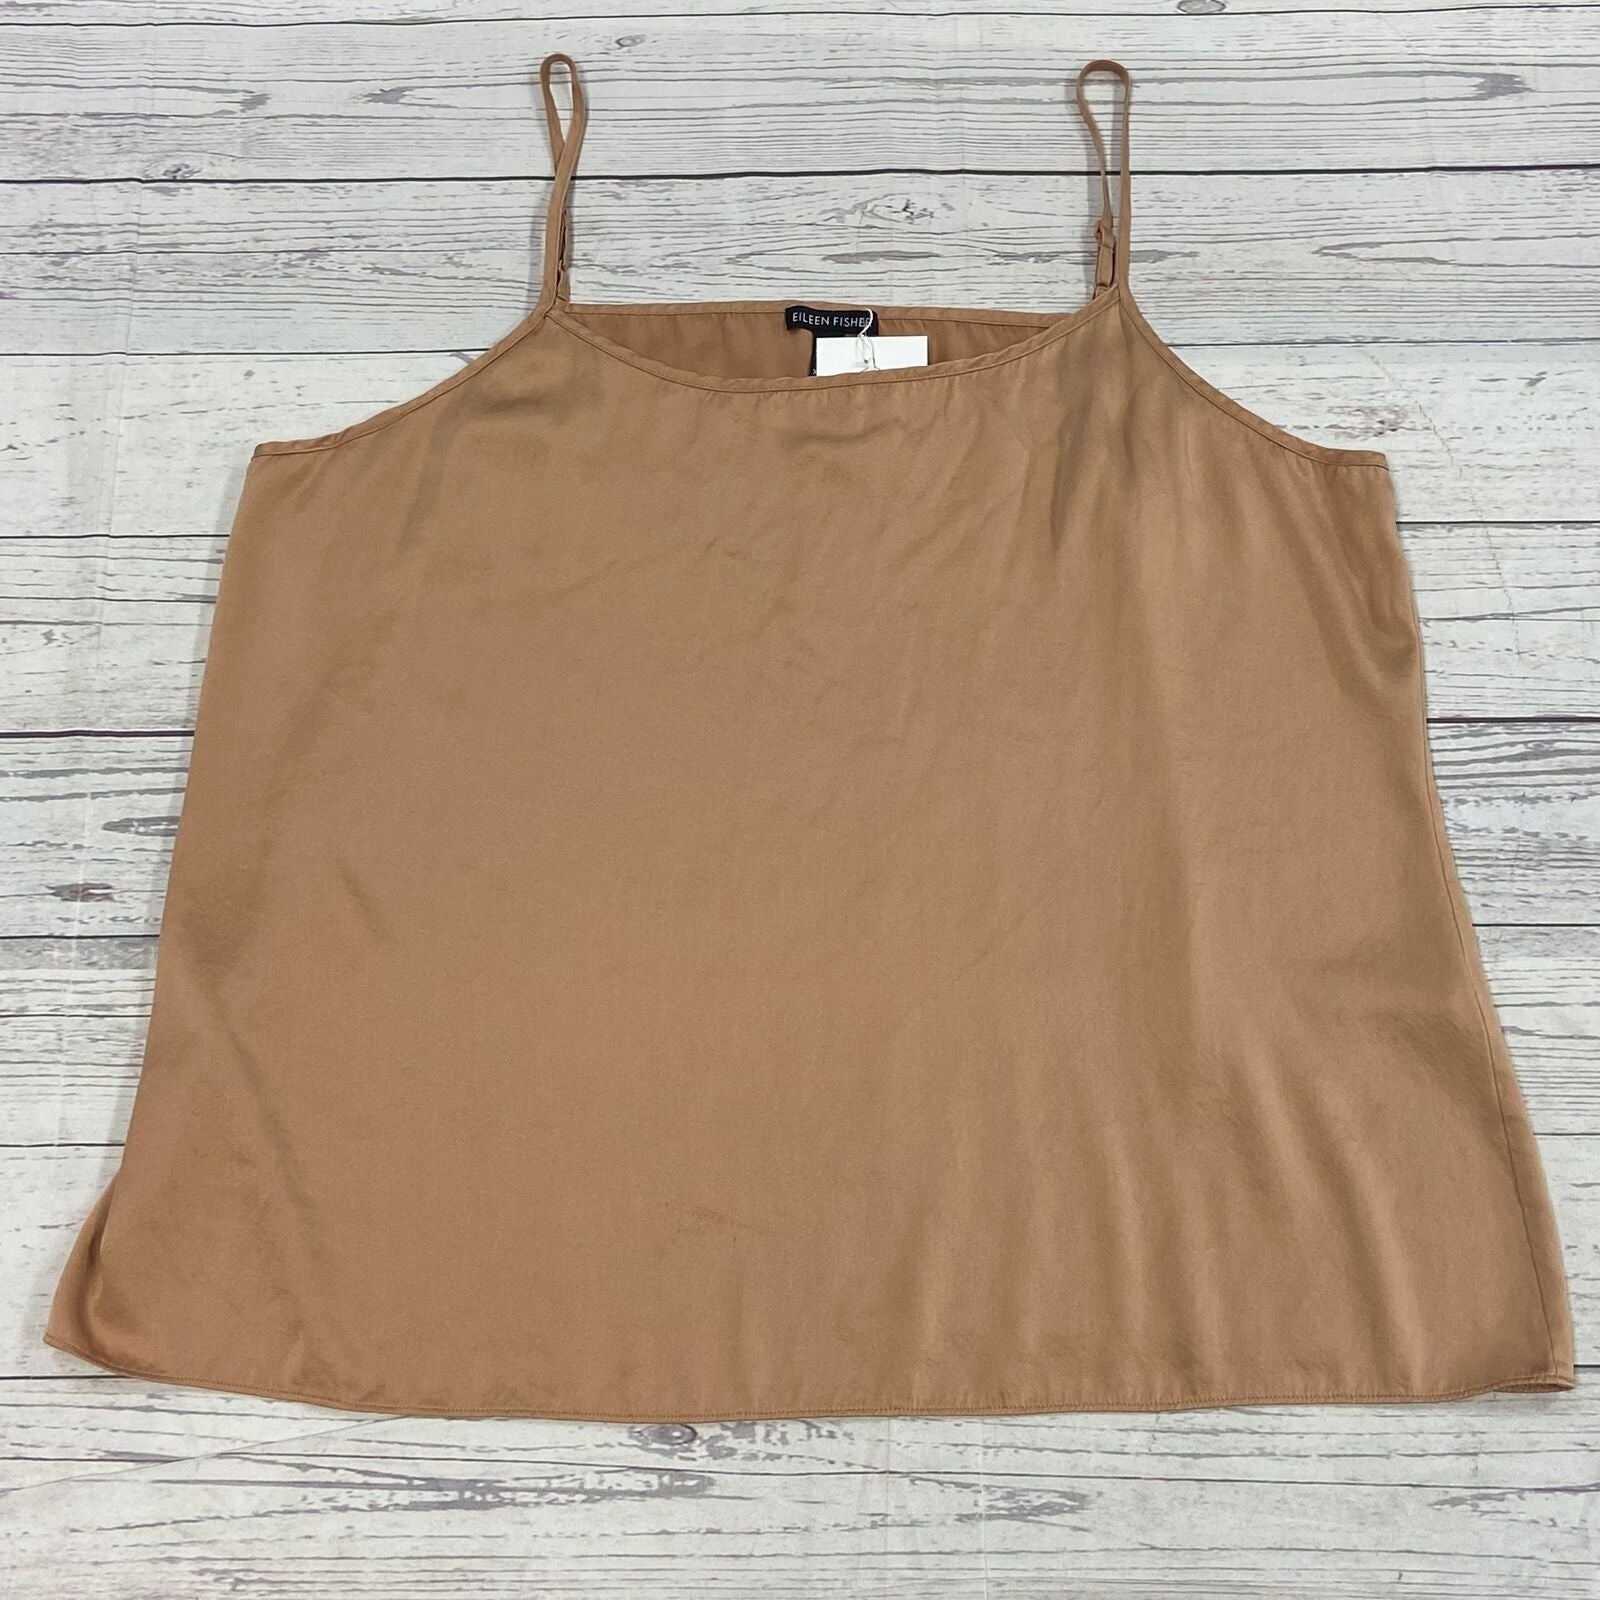 Eileen Fisher Amber Cami Tank Top Women Size XL NEW Nordstrom